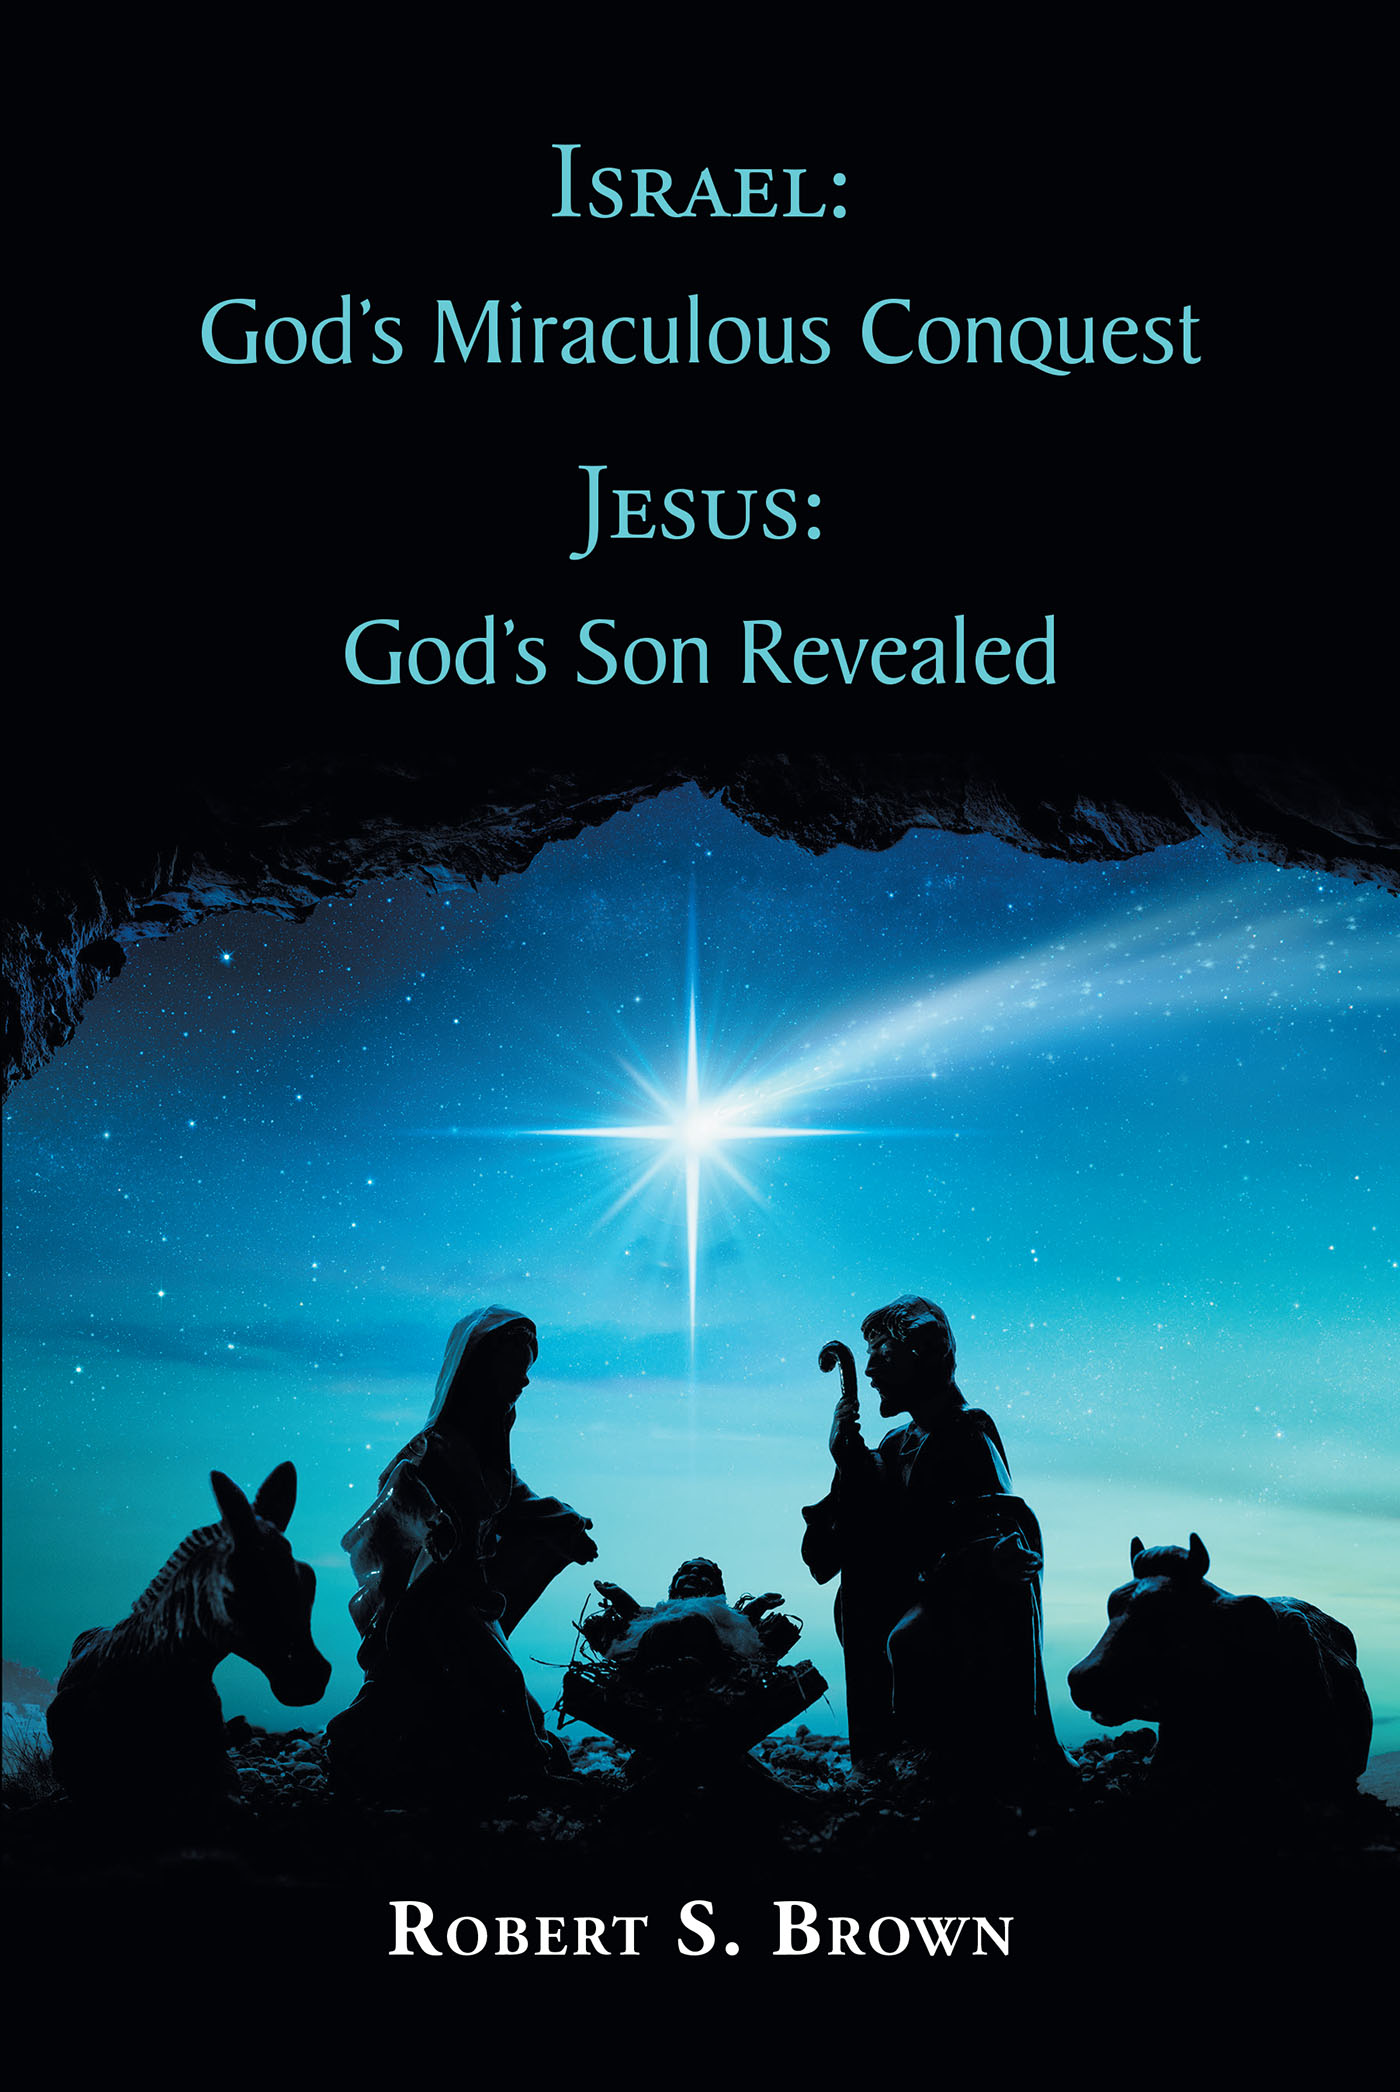 Robert S. Brown’s Newly Released "Israel: God’s Miraculous Conquest: Jesus: God’s Son Revealed" is an Informative Celebration of Christ’s Victory Over Sin